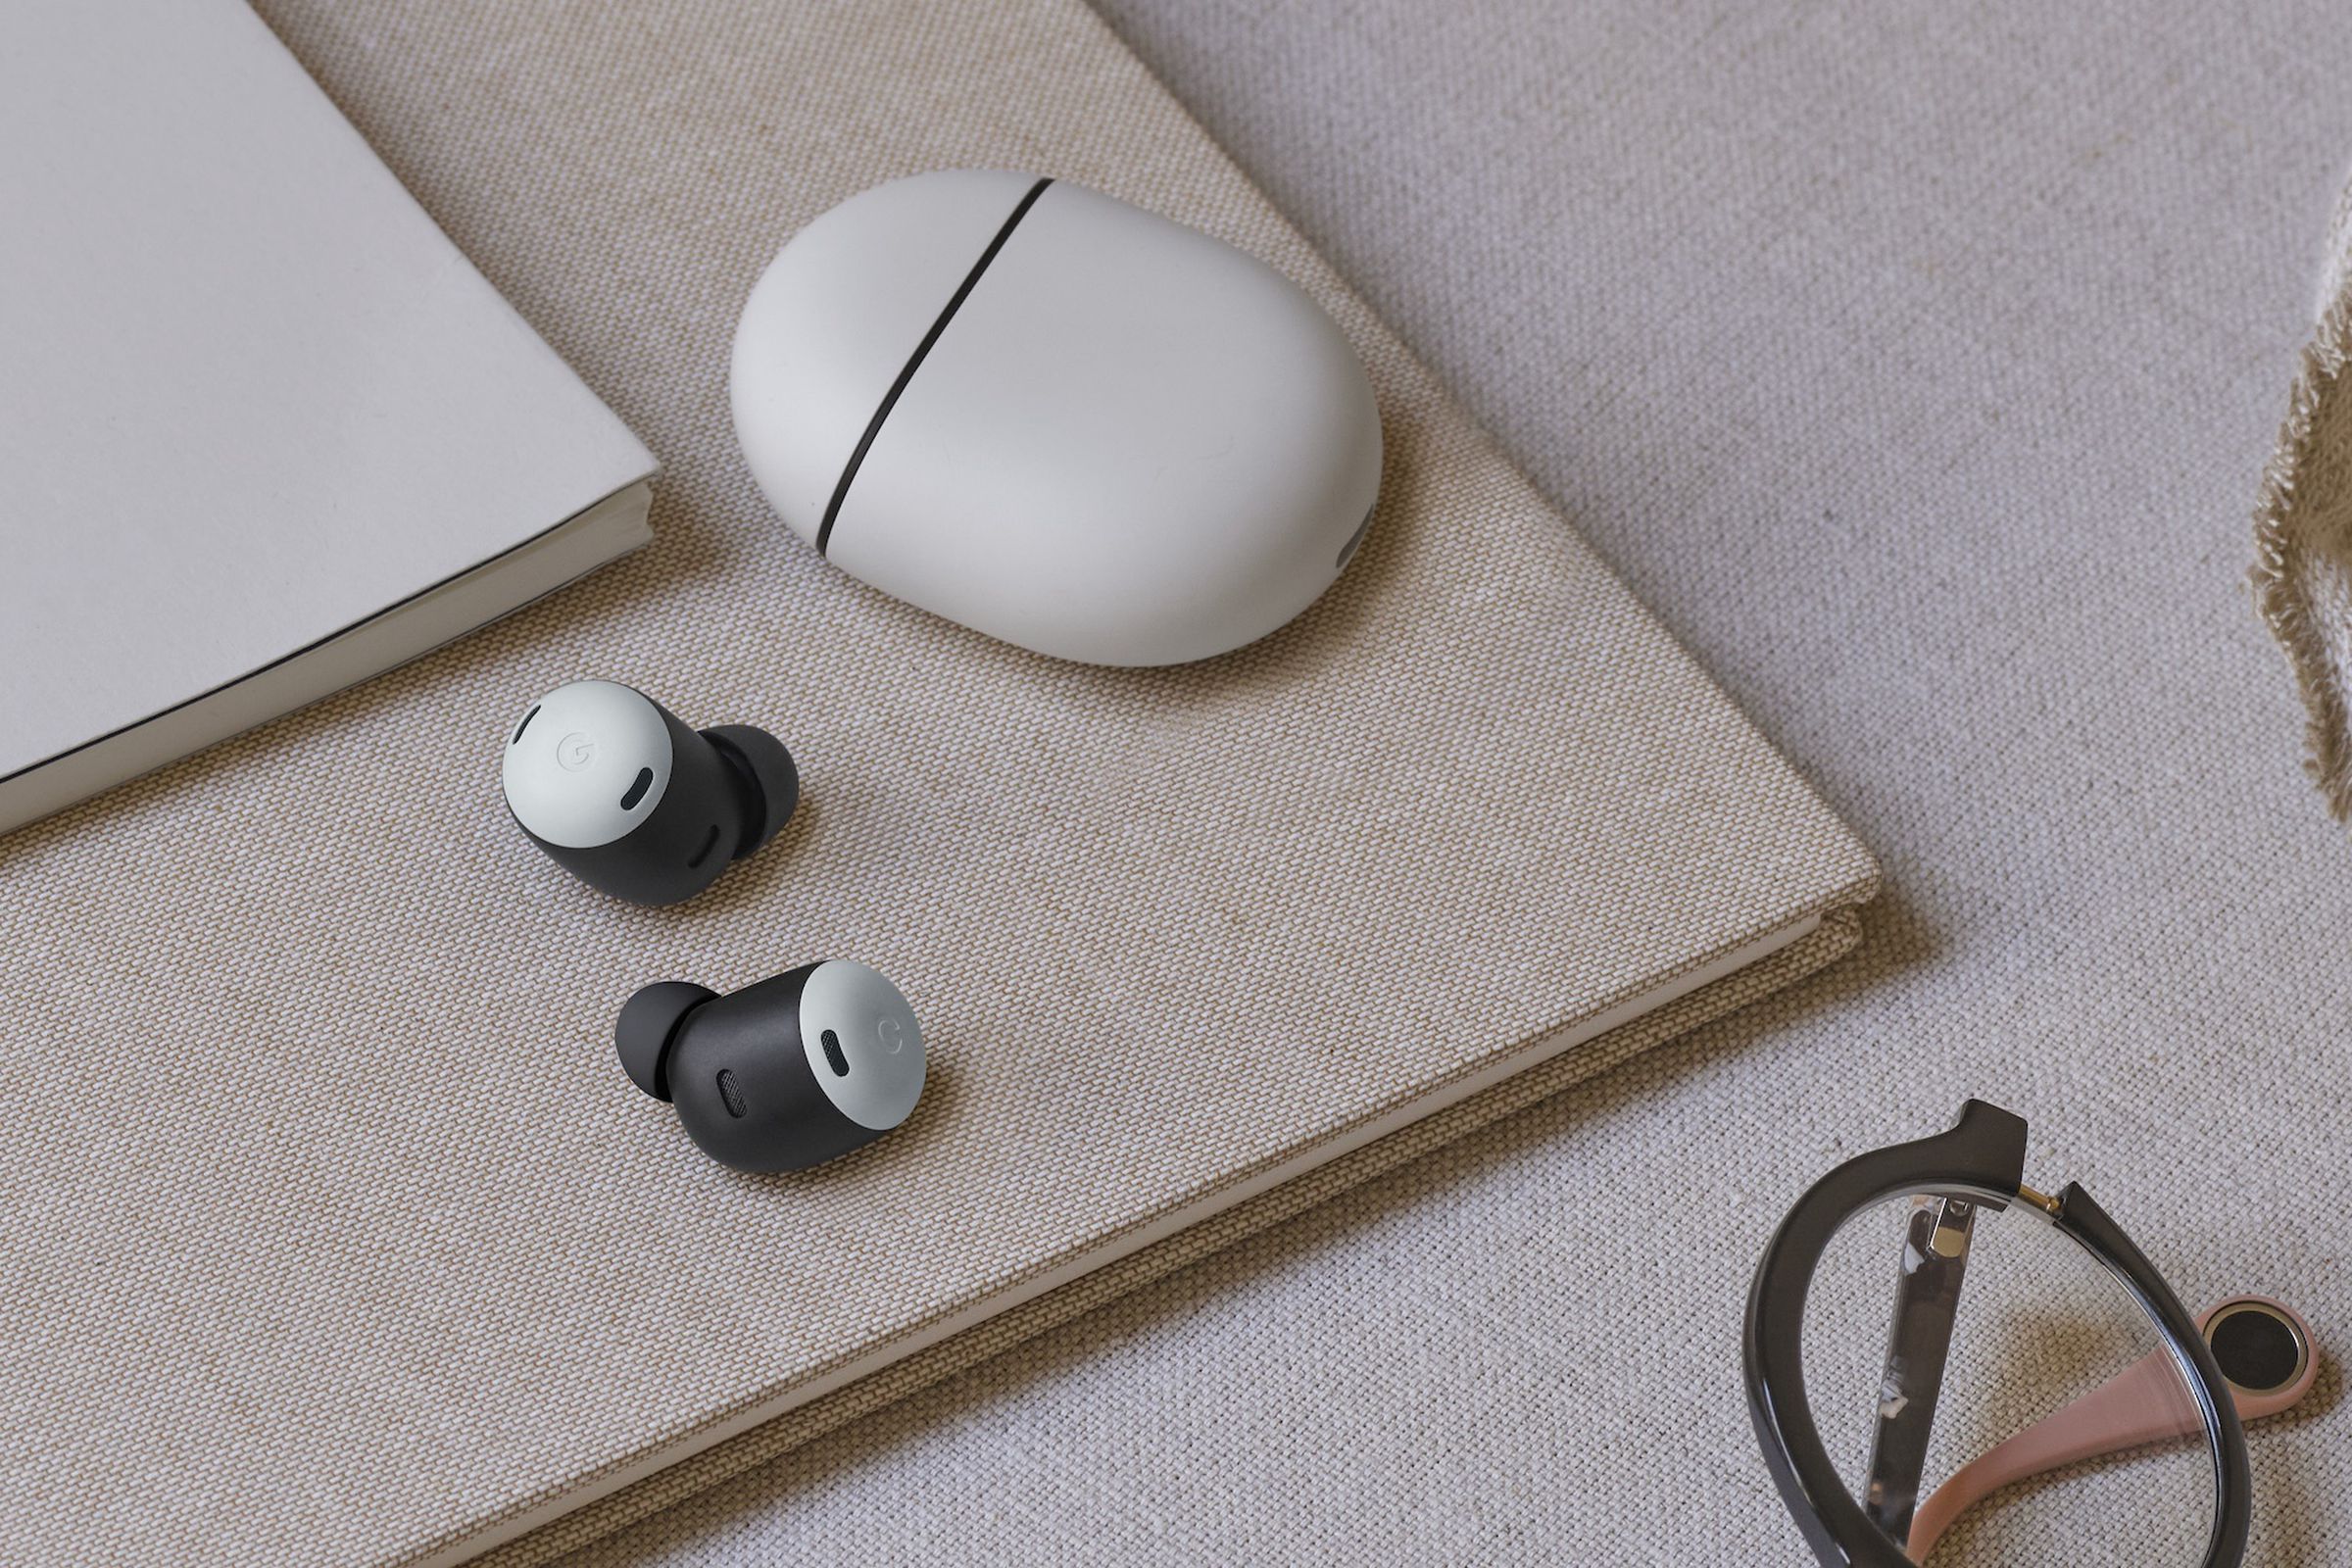 Google’s new Pixel Buds Pro sell for $199, while the Pixel Buds A-Series go for $99.